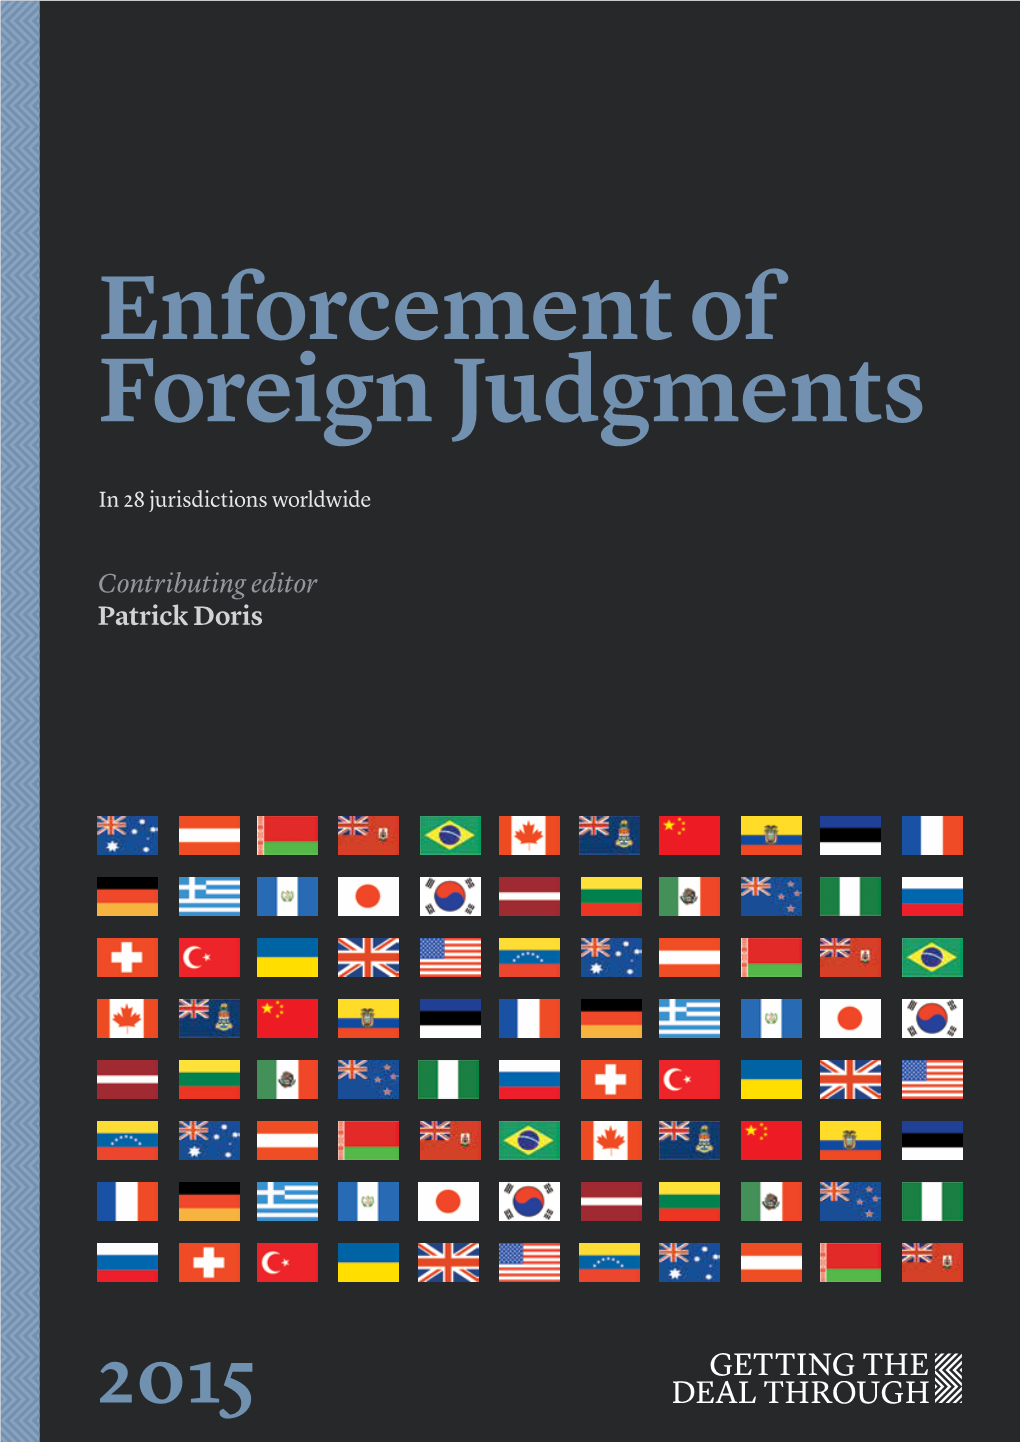 Enforcement of Foreign Judgments 2015 Enforcement of Foreign Judgments 2015